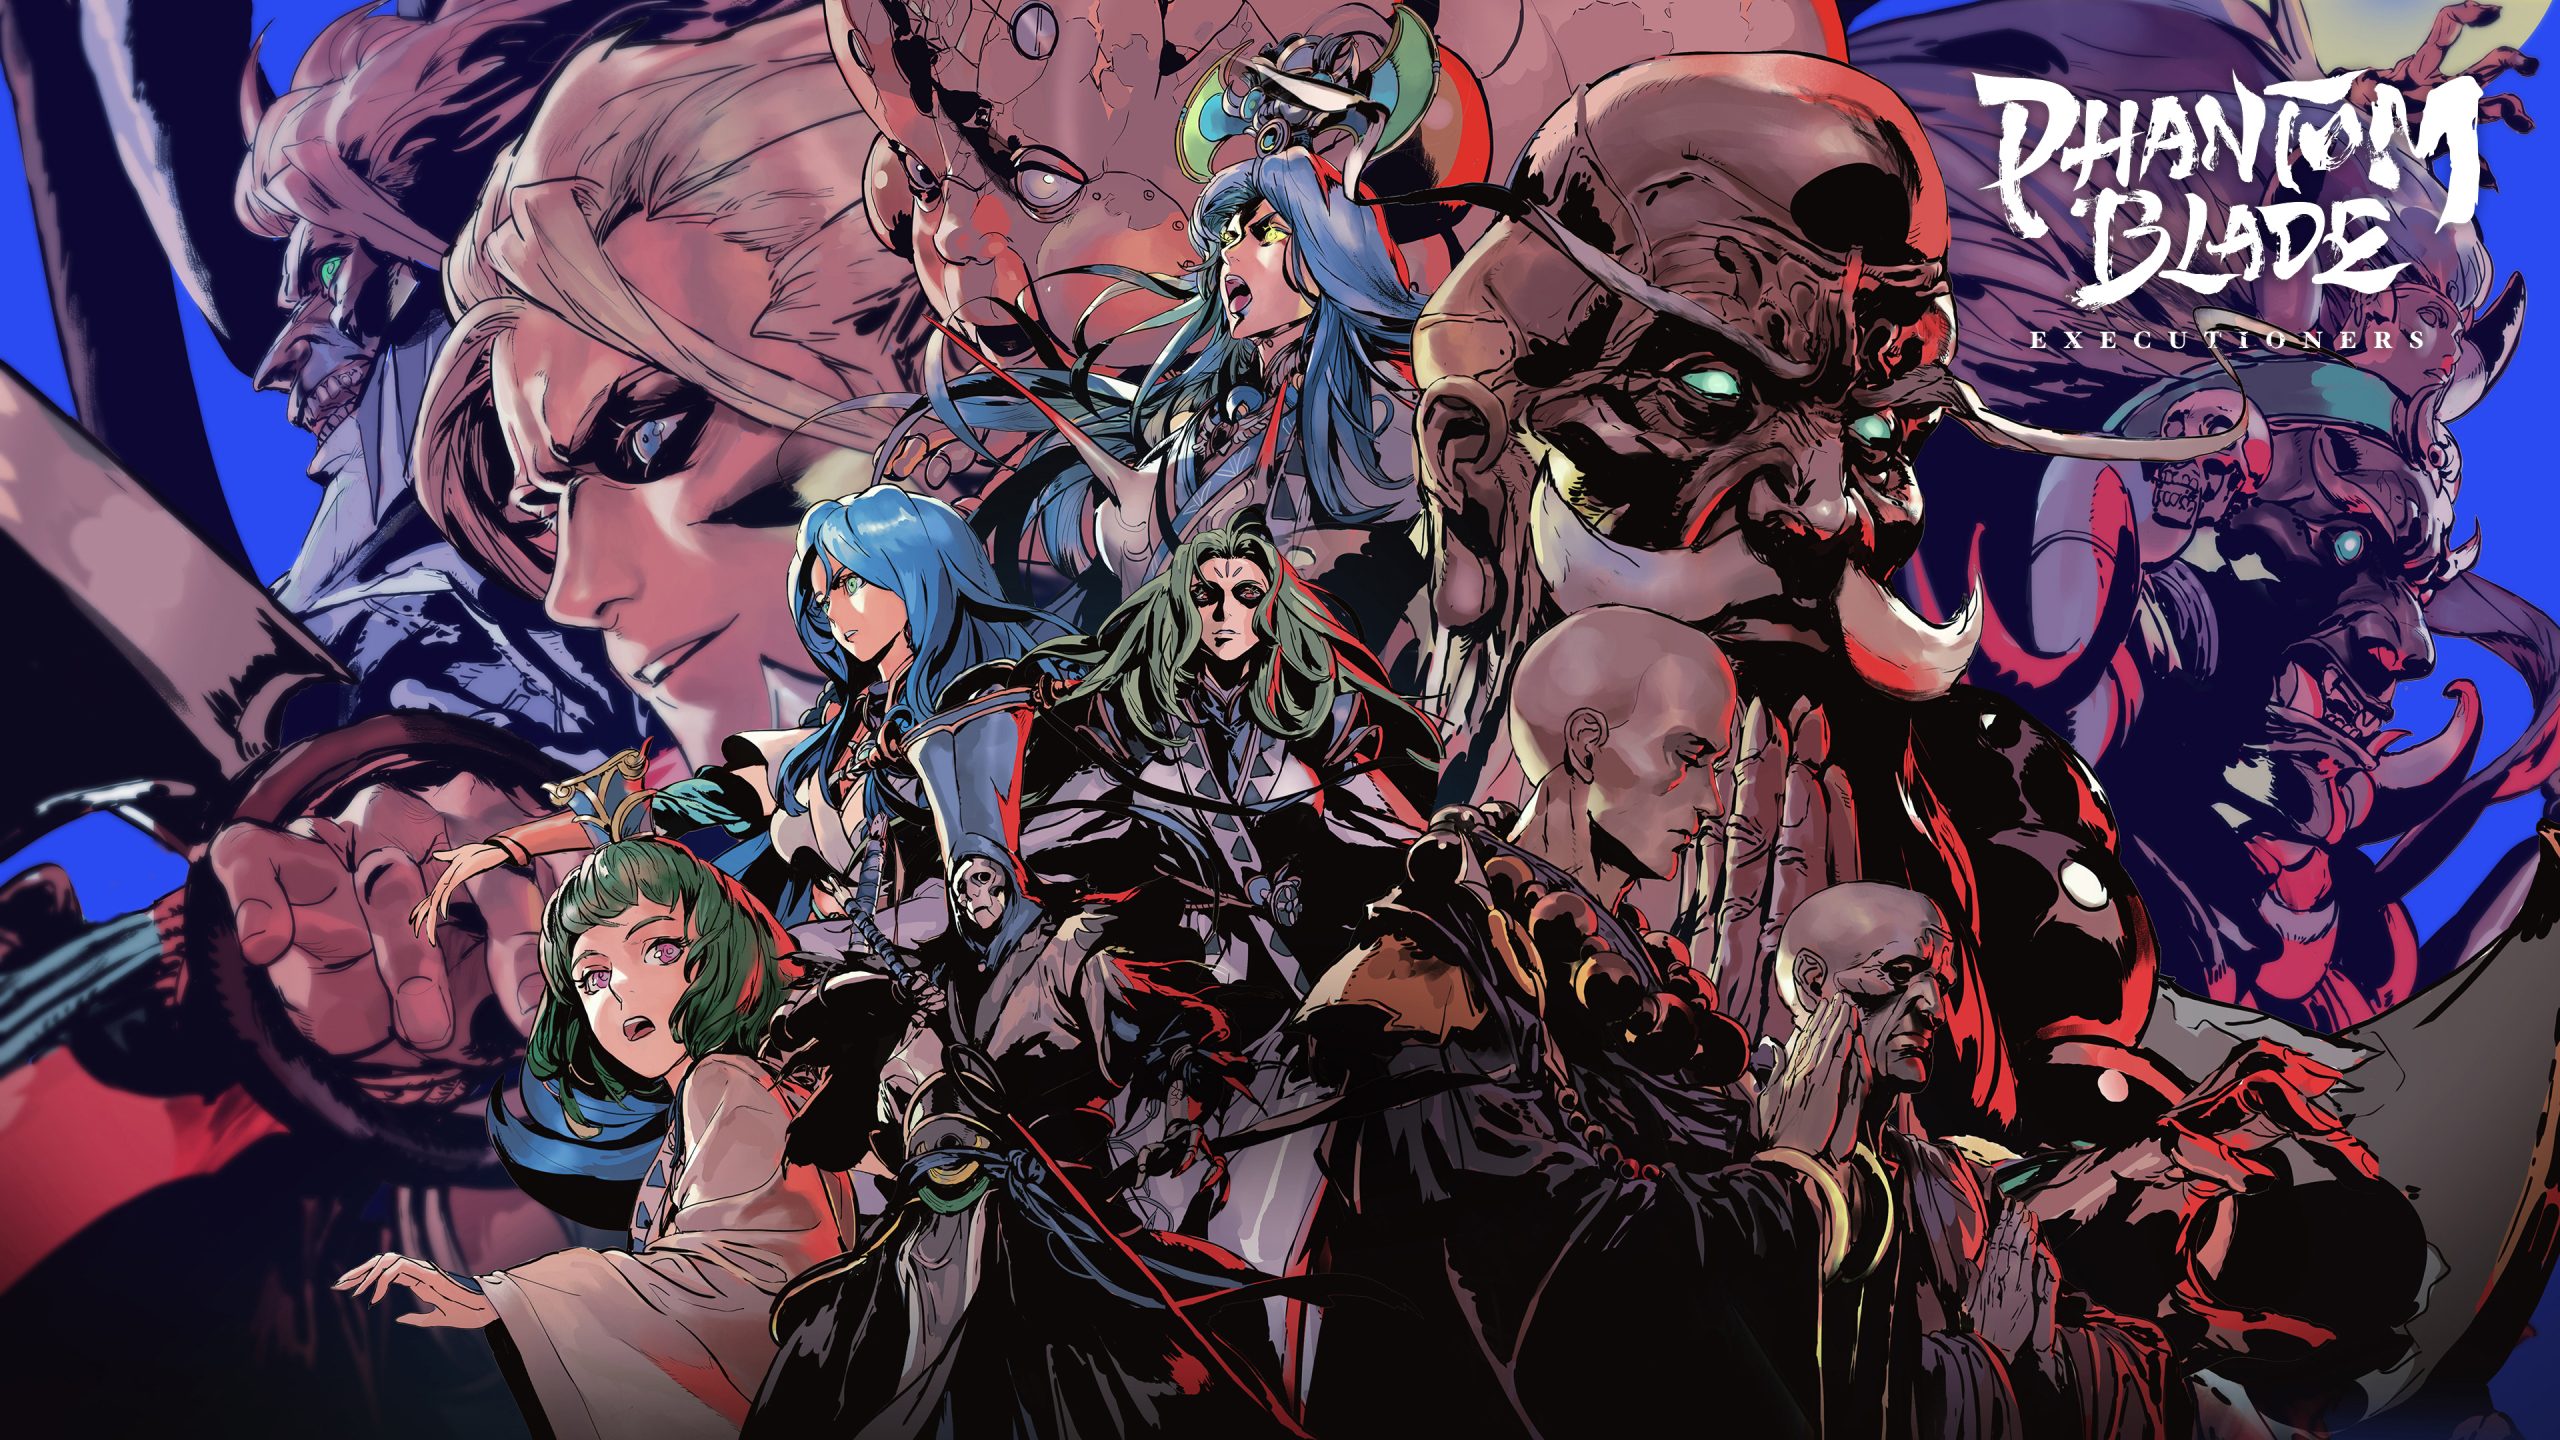 UPDATE: Action RPG ‘Phantom Blade: Executioners’ Launches on Mobile Devices